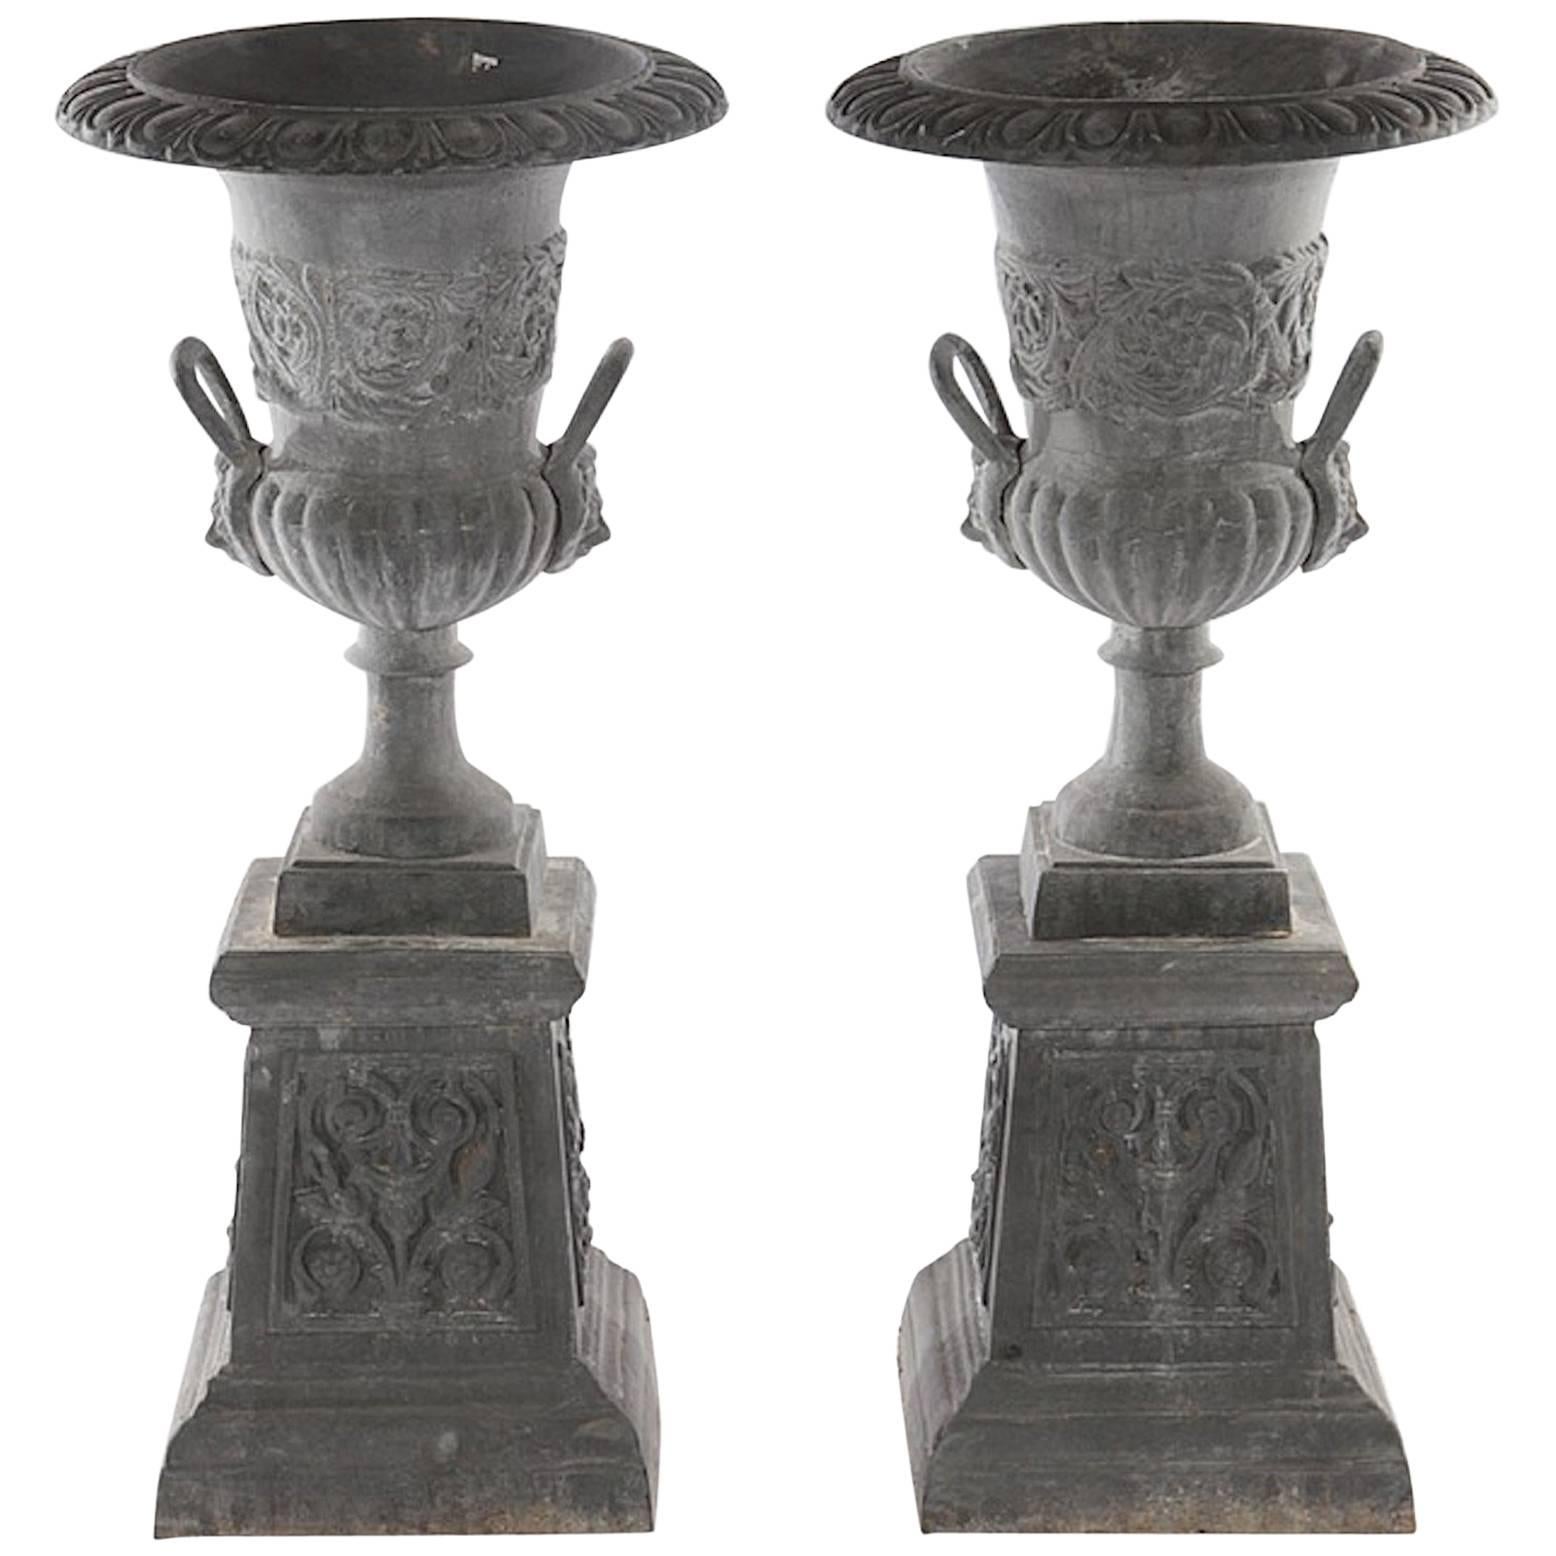 Pair of Neoclassical Style Cast Iron Garden Urn